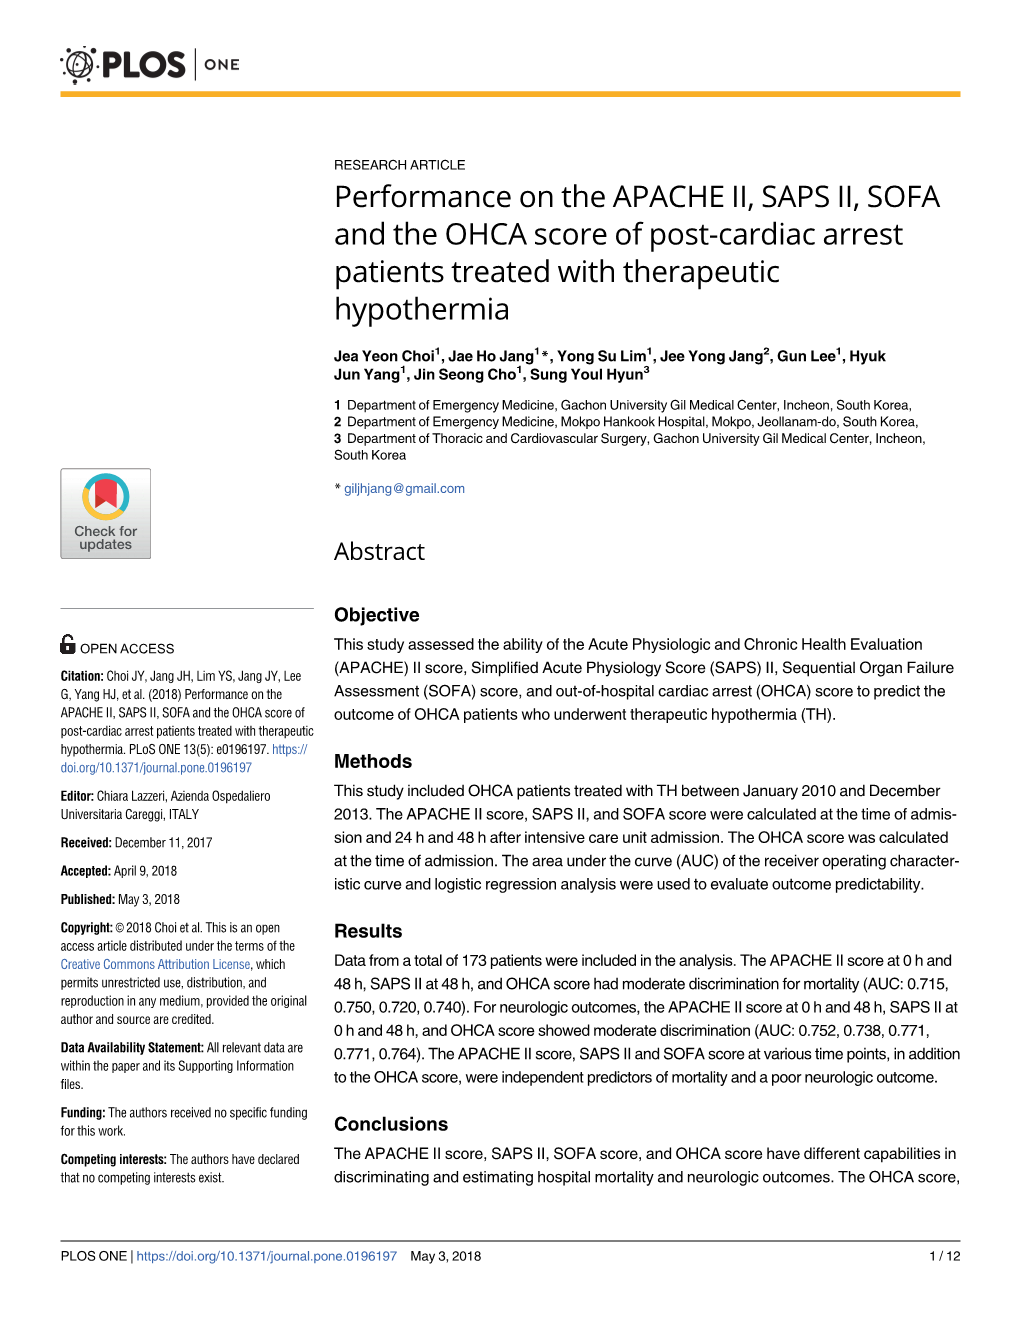 Performance on the APACHE II, SAPS II, SOFA and the OHCA Score of Post-Cardiac Arrest Patients Treated with Therapeutic Hypothermia